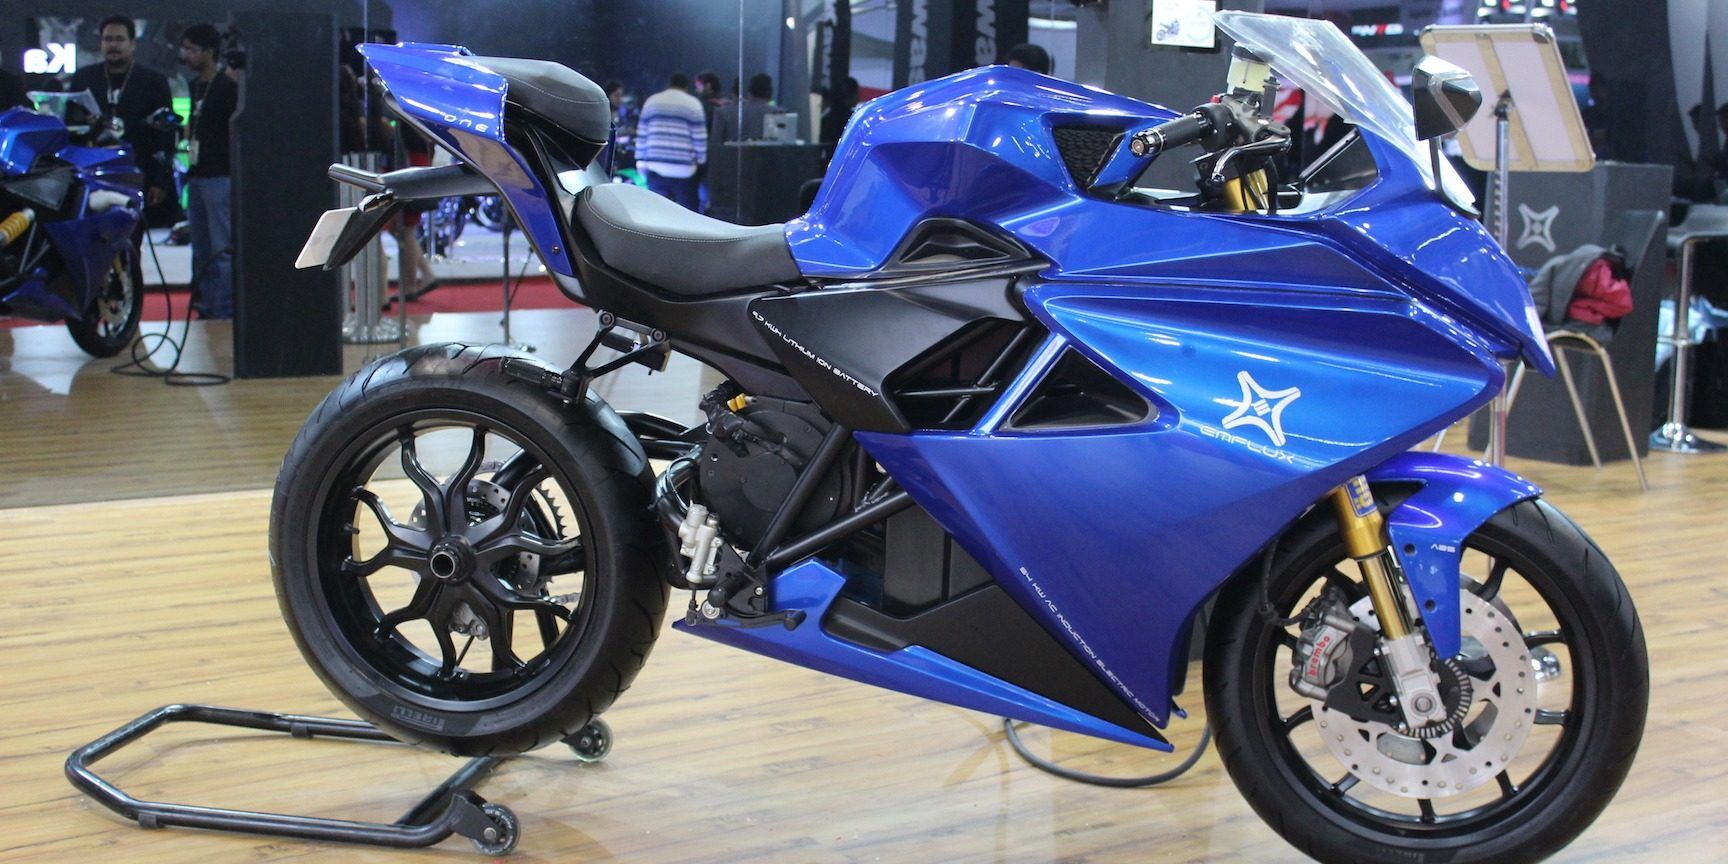 Emflux One electric motorcycle could be the next affordable electric sportbike at $9,000